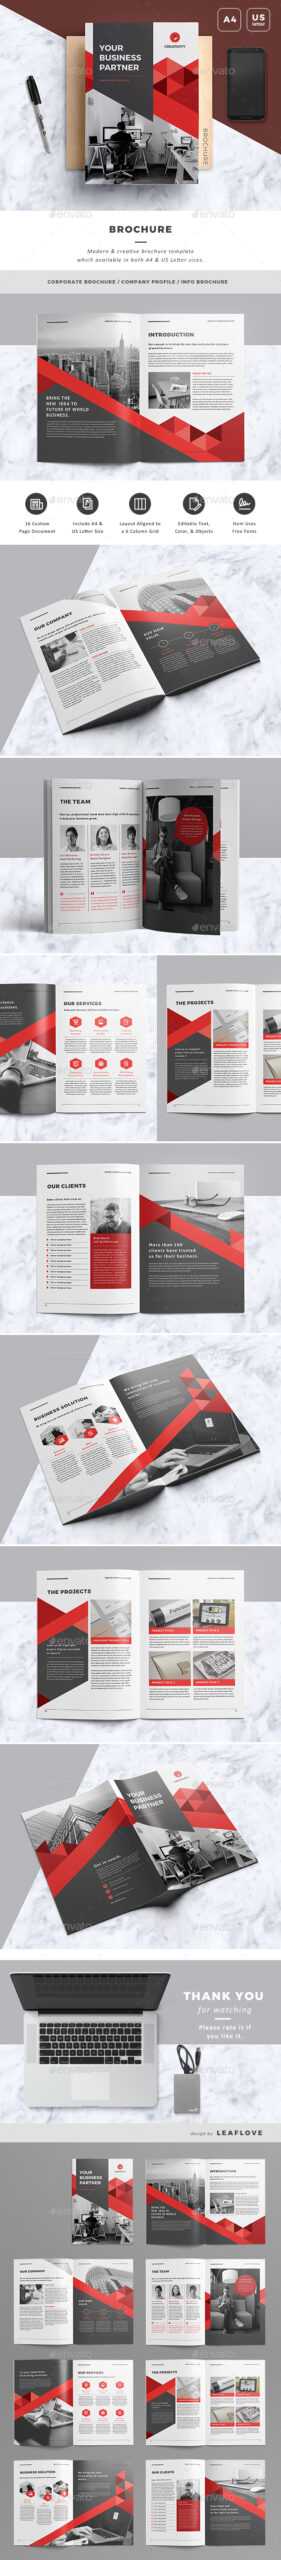 A4 Brochure Templates From Graphicriver In Letter Size Brochure Template